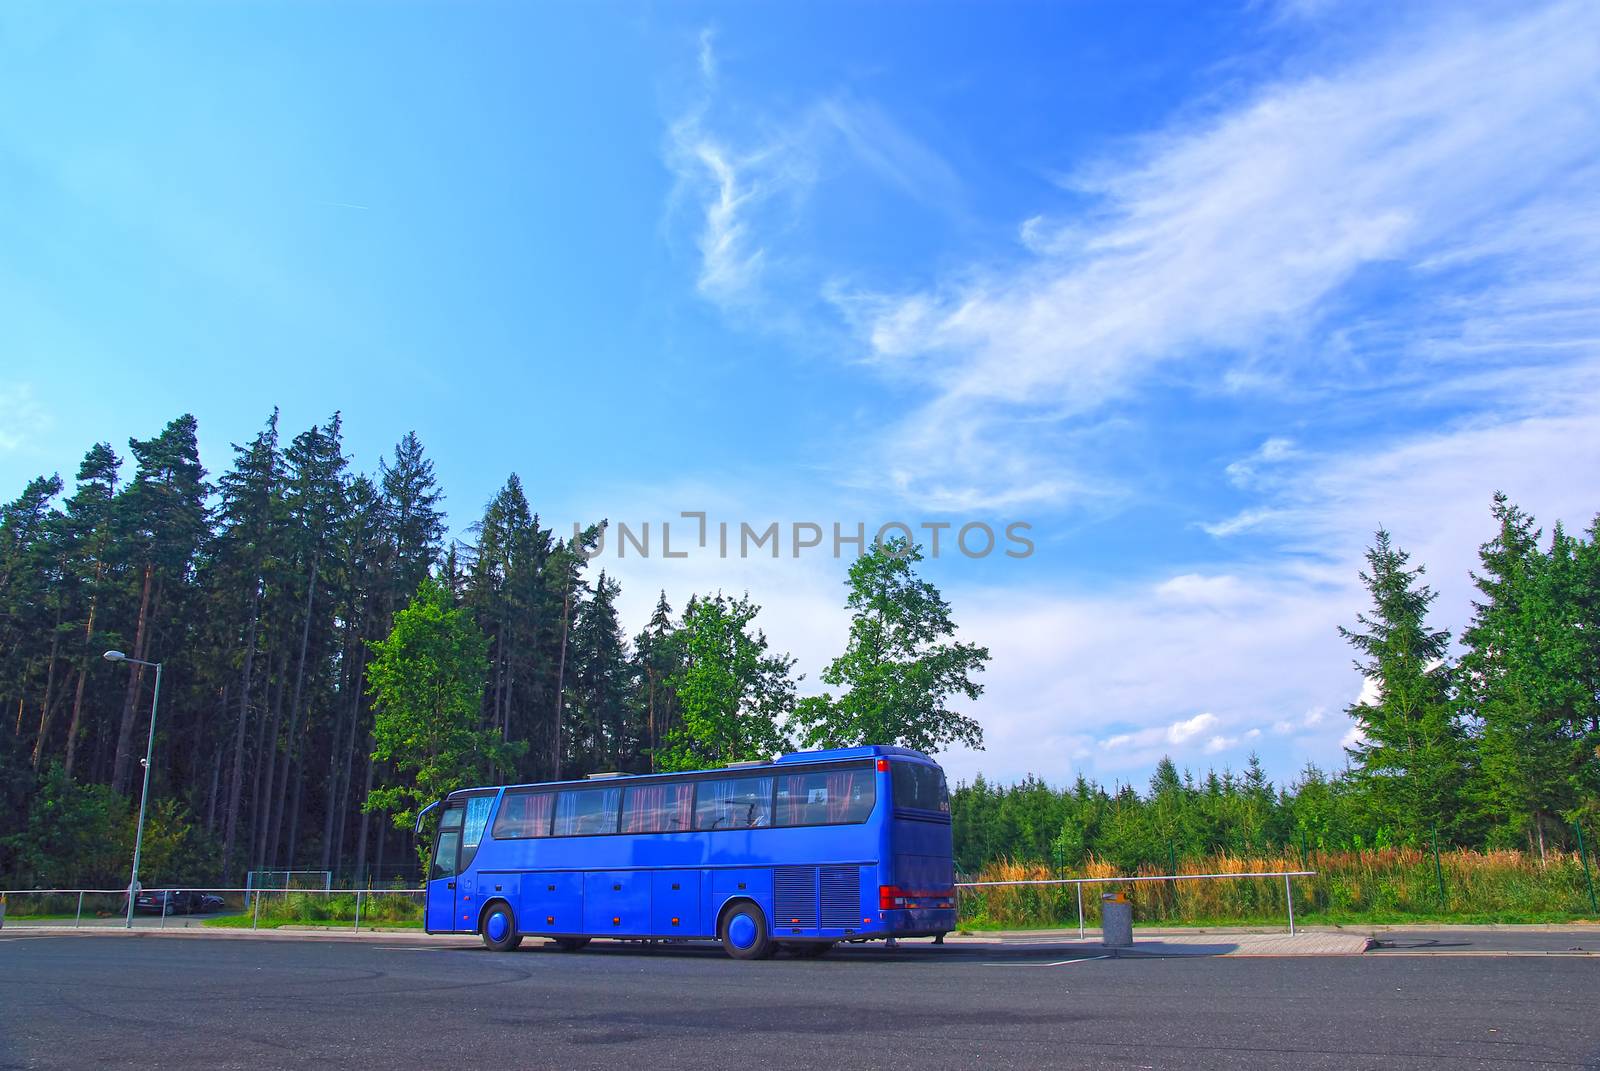 Touristic bus in highway parking by savcoco